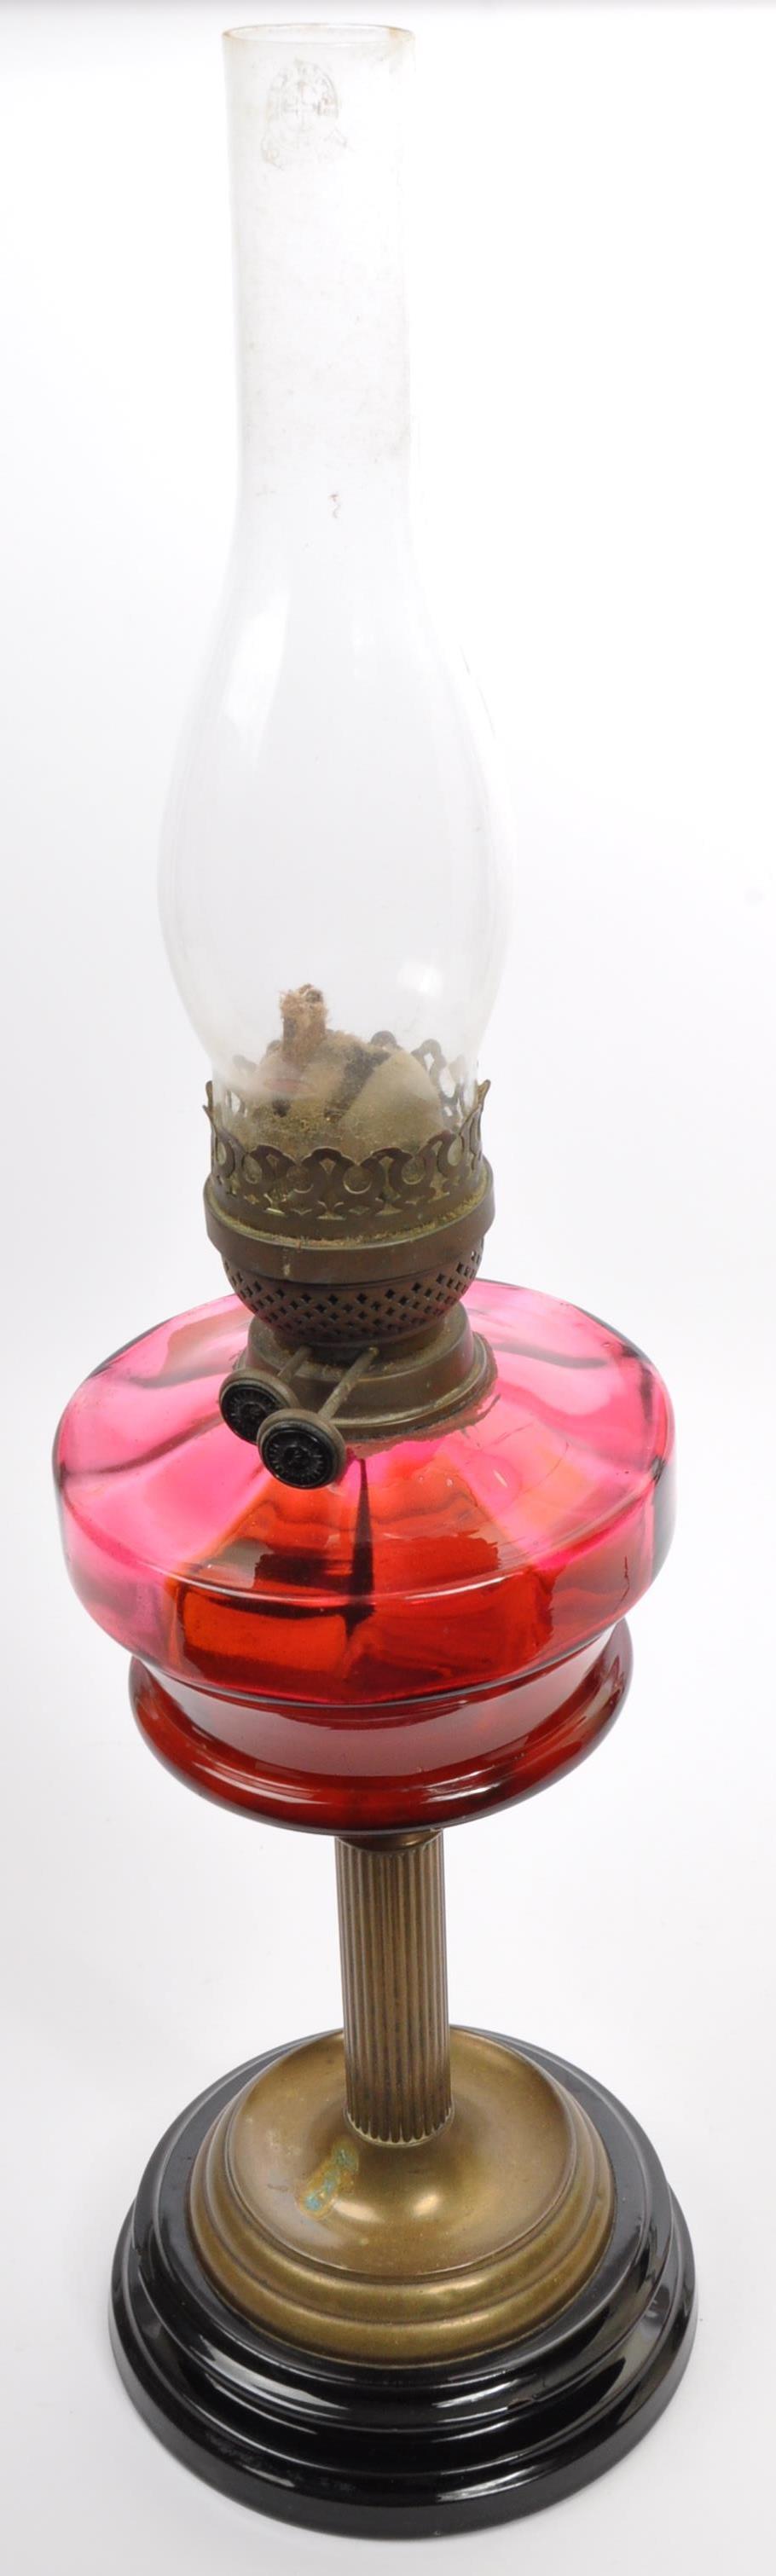 19TH CENTURY CRANBERRY GLASS AND BRASS OIL LAMP - Image 3 of 6